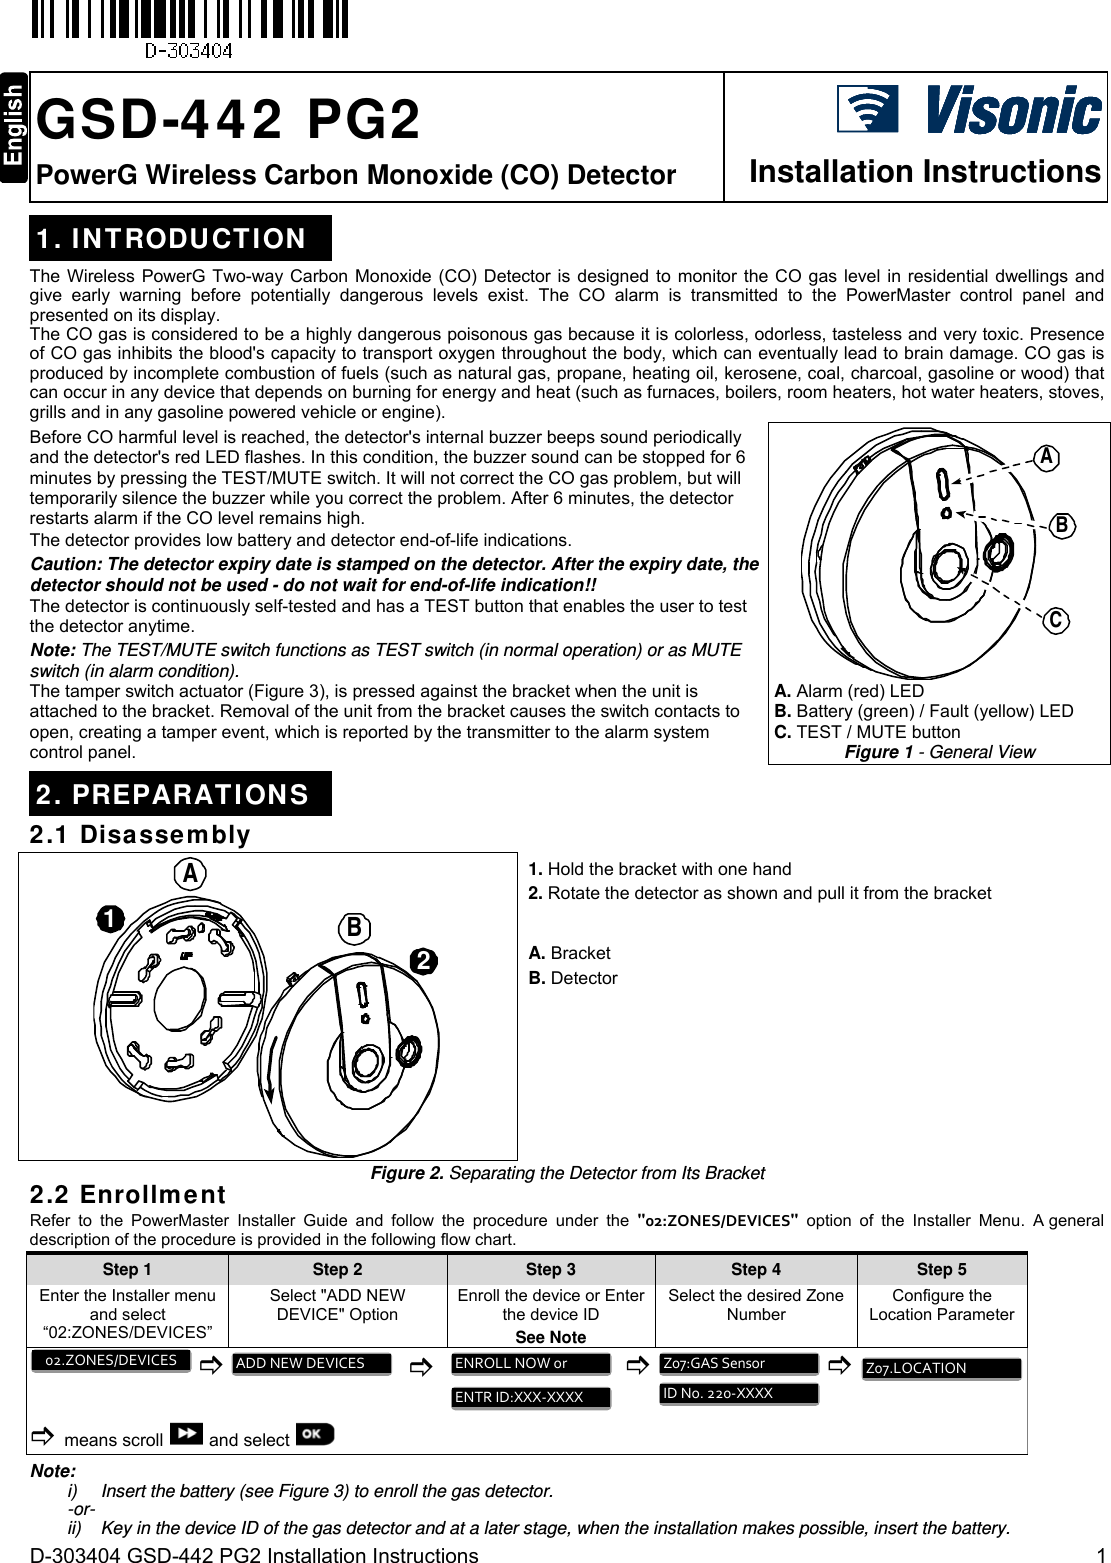  D-303404 GSD-442 PG2 Installation Instructions  1  GSD-442 PG2 PowerG Wireless Carbon Monoxide (CO) Detector  Installation Instructions1. INTRODUCTION The Wireless PowerG Two-way Carbon Monoxide (CO) Detector is designed to monitor the CO gas level in residential dwellings and give early warning before potentially dangerous levels exist. The CO alarm is transmitted to the PowerMaster control panel and presented on its display. The CO gas is considered to be a highly dangerous poisonous gas because it is colorless, odorless, tasteless and very toxic. Presence of CO gas inhibits the blood&apos;s capacity to transport oxygen throughout the body, which can eventually lead to brain damage. CO gas is produced by incomplete combustion of fuels (such as natural gas, propane, heating oil, kerosene, coal, charcoal, gasoline or wood) that can occur in any device that depends on burning for energy and heat (such as furnaces, boilers, room heaters, hot water heaters, stoves, grills and in any gasoline powered vehicle or engine).  Before CO harmful level is reached, the detector&apos;s internal buzzer beeps sound periodically and the detector&apos;s red LED flashes. In this condition, the buzzer sound can be stopped for 6 minutes by pressing the TEST/MUTE switch. It will not correct the CO gas problem, but will temporarily silence the buzzer while you correct the problem. After 6 minutes, the detector restarts alarm if the CO level remains high. The detector provides low battery and detector end-of-life indications. Caution: The detector expiry date is stamped on the detector. After the expiry date, the detector should not be used - do not wait for end-of-life indication!! The detector is continuously self-tested and has a TEST button that enables the user to test the detector anytime. Note: The TEST/MUTE switch functions as TEST switch (in normal operation) or as MUTE switch (in alarm condition). The tamper switch actuator (Figure 3), is pressed against the bracket when the unit is attached to the bracket. Removal of the unit from the bracket causes the switch contacts to open, creating a tamper event, which is reported by the transmitter to the alarm system control panel. ABC A. Alarm (red) LED  B. Battery (green) / Fault (yellow) LED  C. TEST / MUTE button Figure 1 - General View 2. PREPARATIONS 2.1 Disassembly 12AB 1. Hold the bracket with one hand 2. Rotate the detector as shown and pull it from the bracket A. Bracket B. Detector Figure 2. Separating the Detector from Its Bracket 2.2 Enrollment Refer to the PowerMaster Installer Guide and follow the procedure under the &quot;02:ZONES/DEVICES&quot; option of the Installer Menu. A general description of the procedure is provided in the following flow chart. Step 1 Step 2 Step 3 Step 4    Step 5 Enter the Installer menu and select “02:ZONES/DEVICES” Select &quot;ADD NEW  DEVICE&quot; Option  Enroll the device or Enter the device ID See Note Select the desired Zone Number Configure the Location Parameter           means scroll  and select          Note: i)  Insert the battery (see Figure 3) to enroll the gas detector. -or- ii)  Key in the device ID of the gas detector and at a later stage, when the installation makes possible, insert the battery. Z07.LOCATIONIDNo.220‐XXXXZ07:GASSensorENTRID:XXX‐XXXXENROLLNOWorADDNEWDEVICES02.ZONES/DEVICES